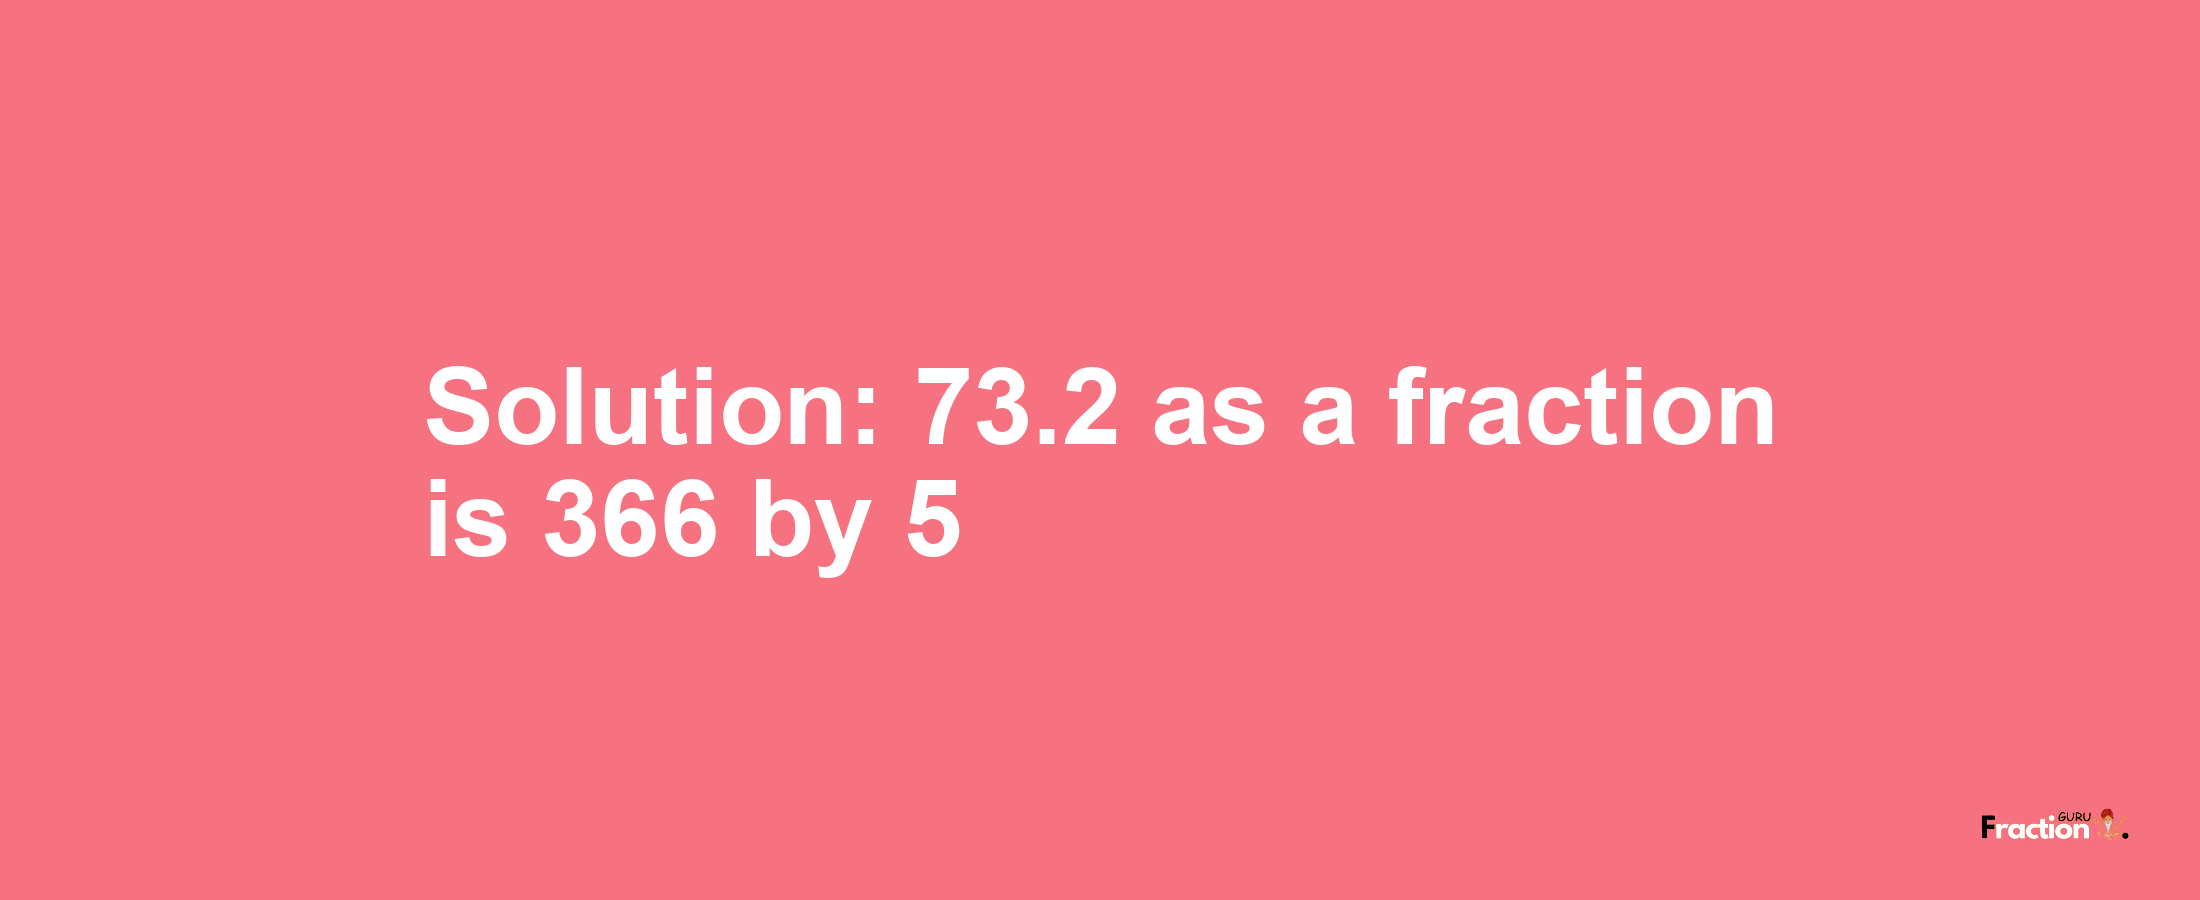 Solution:73.2 as a fraction is 366/5